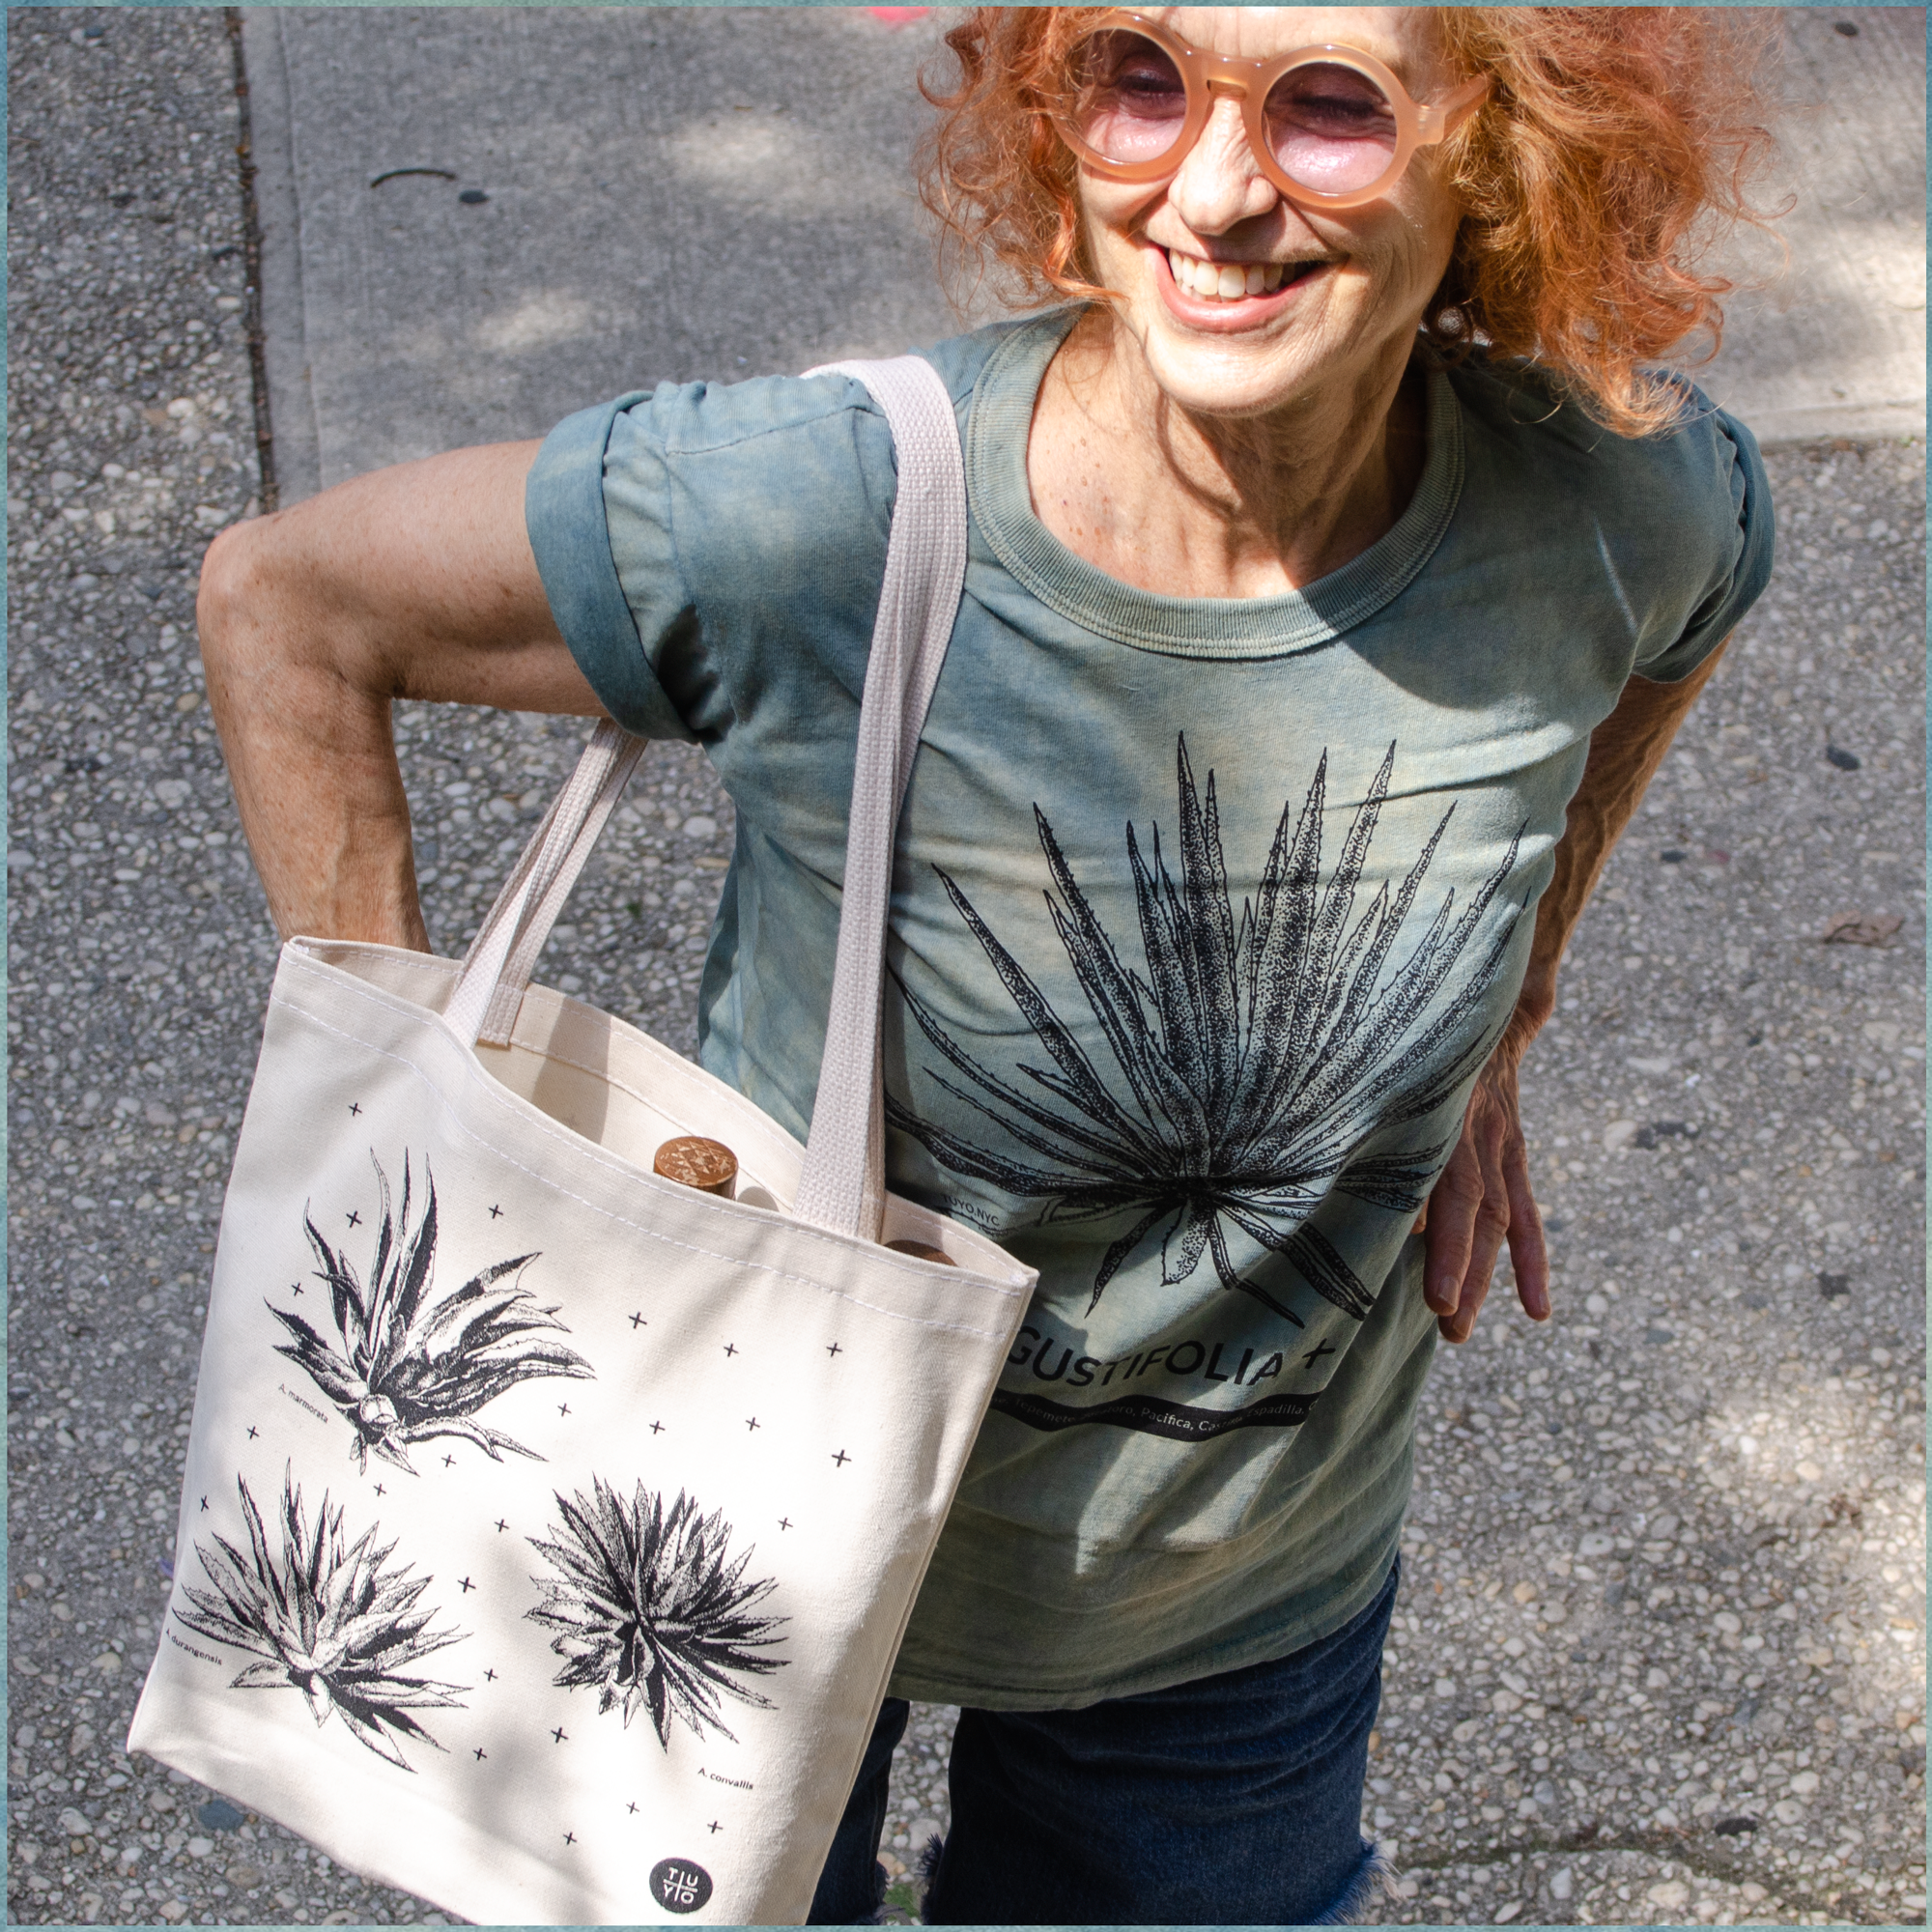 Agave Canvas Tote Bag